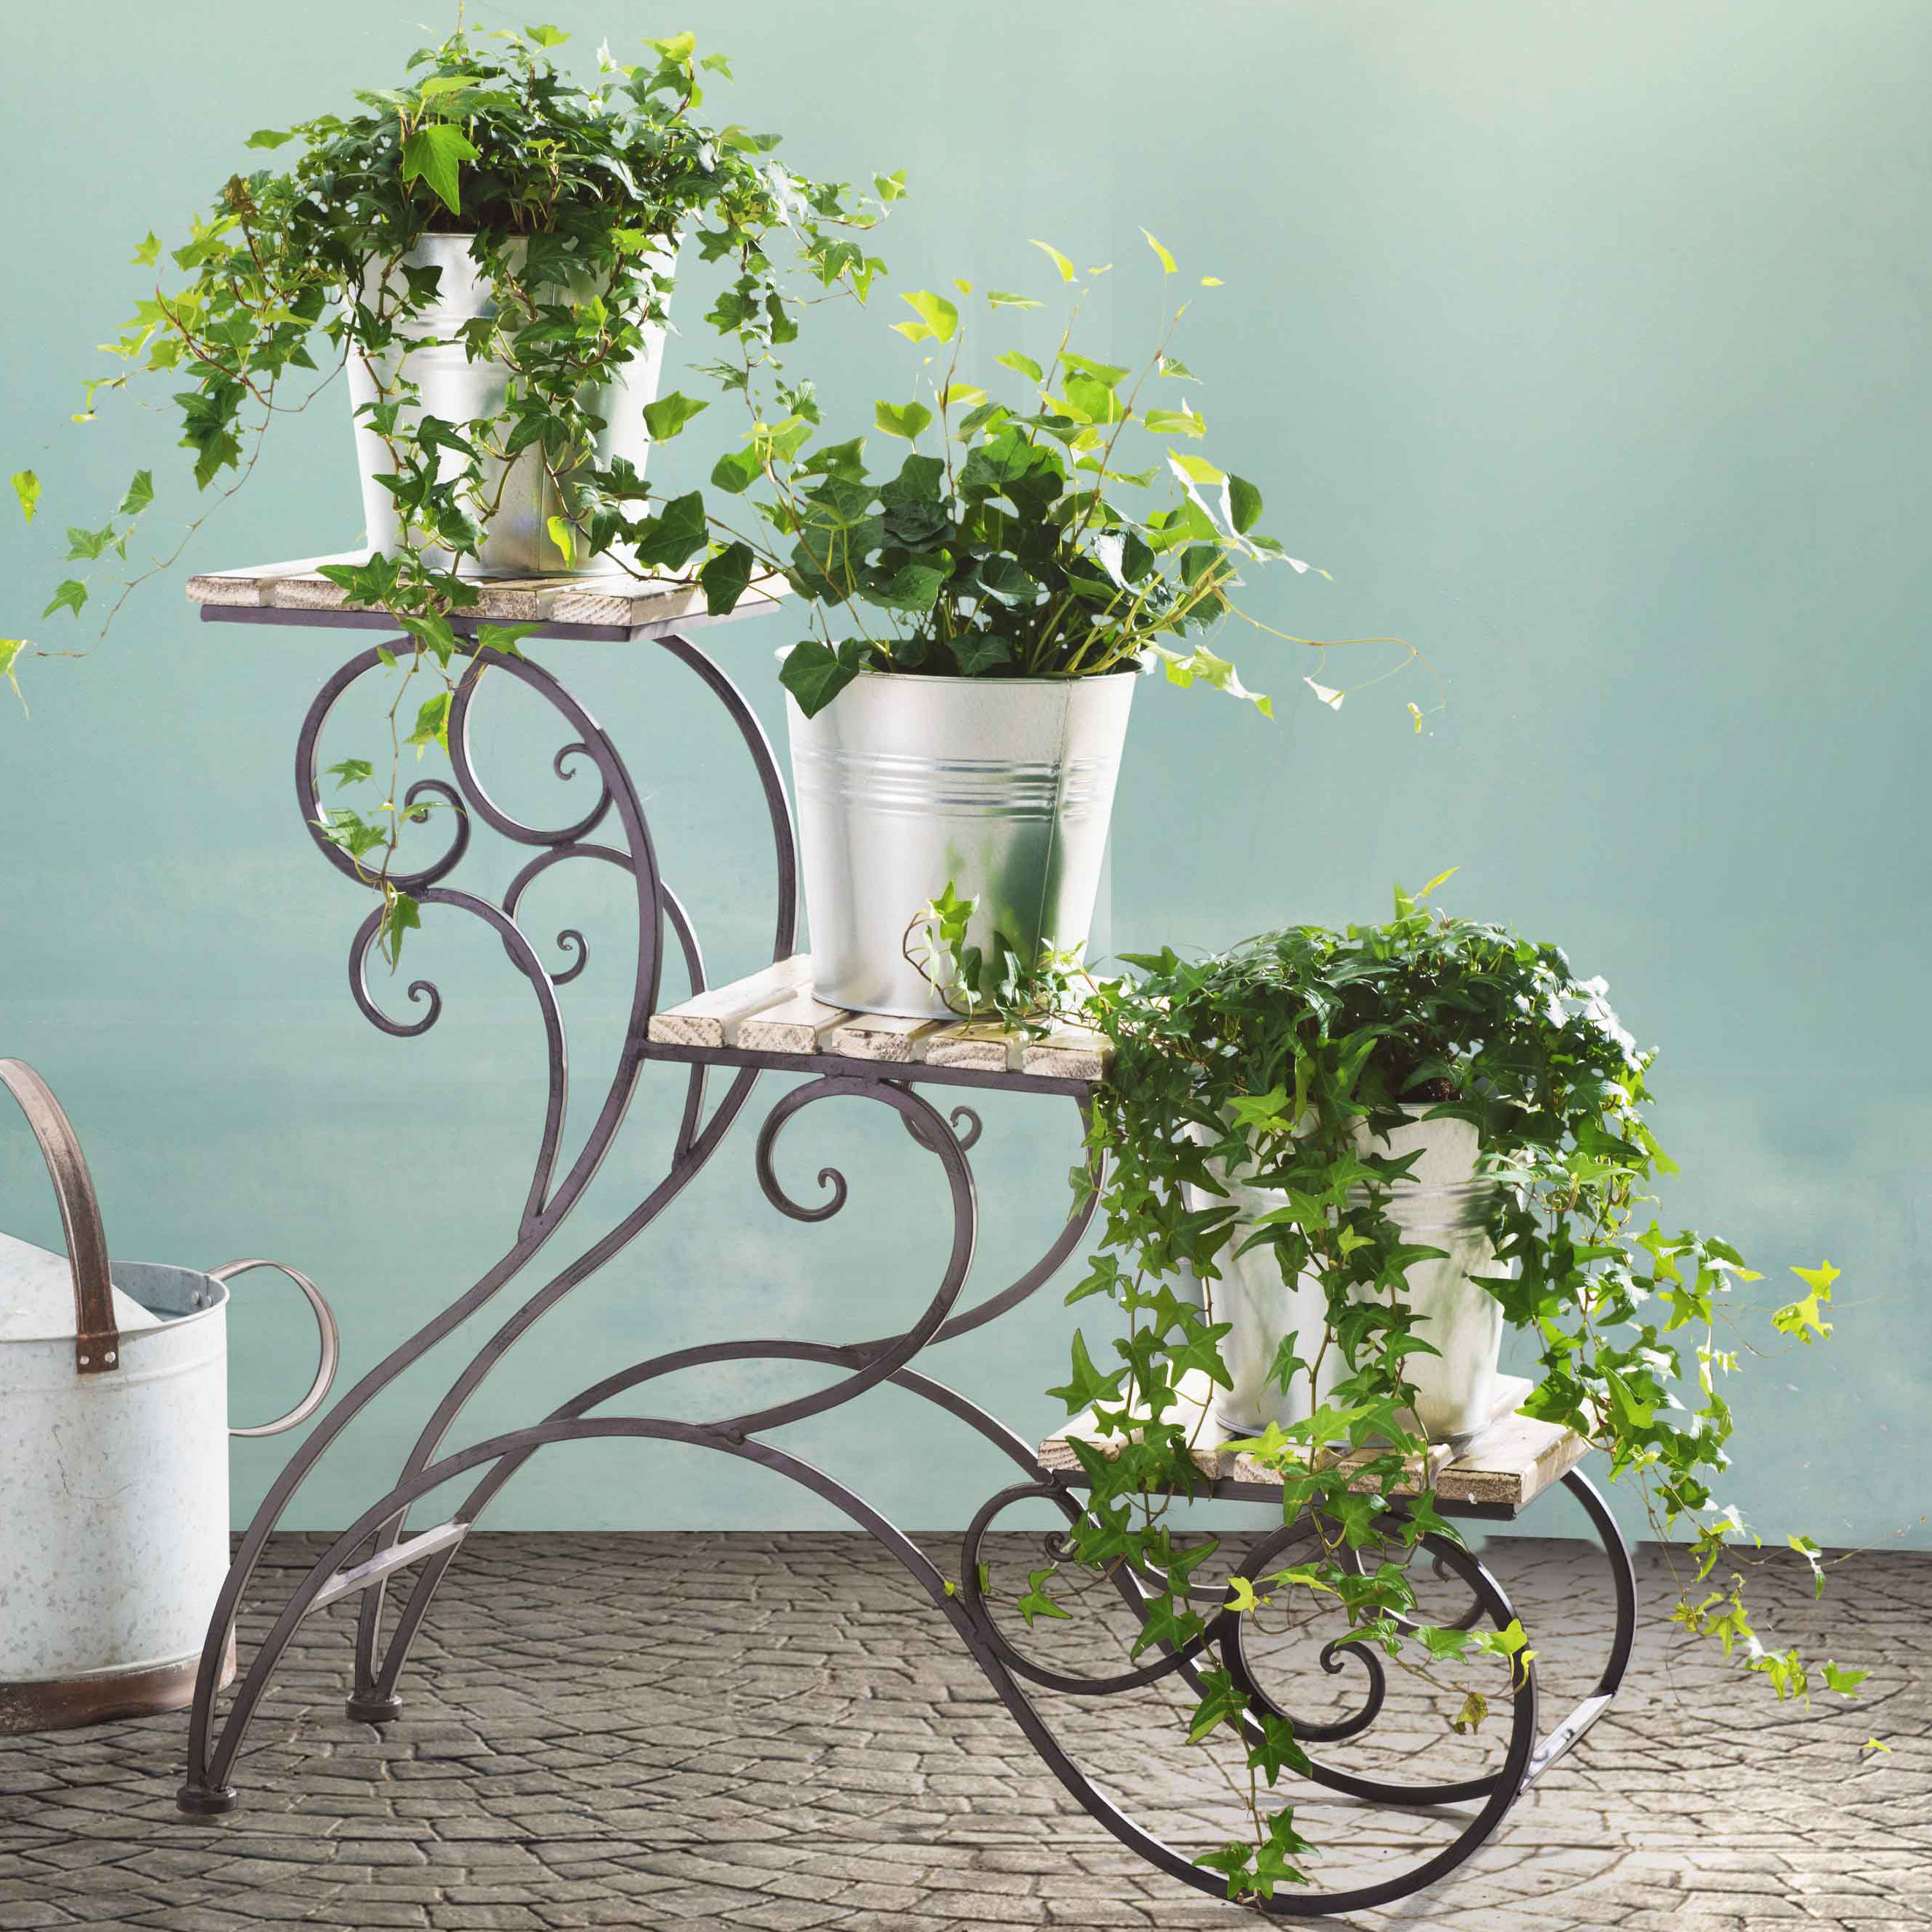 10 Best Multi-Tier Plant Stands for Stunning Vertical Gardens: A